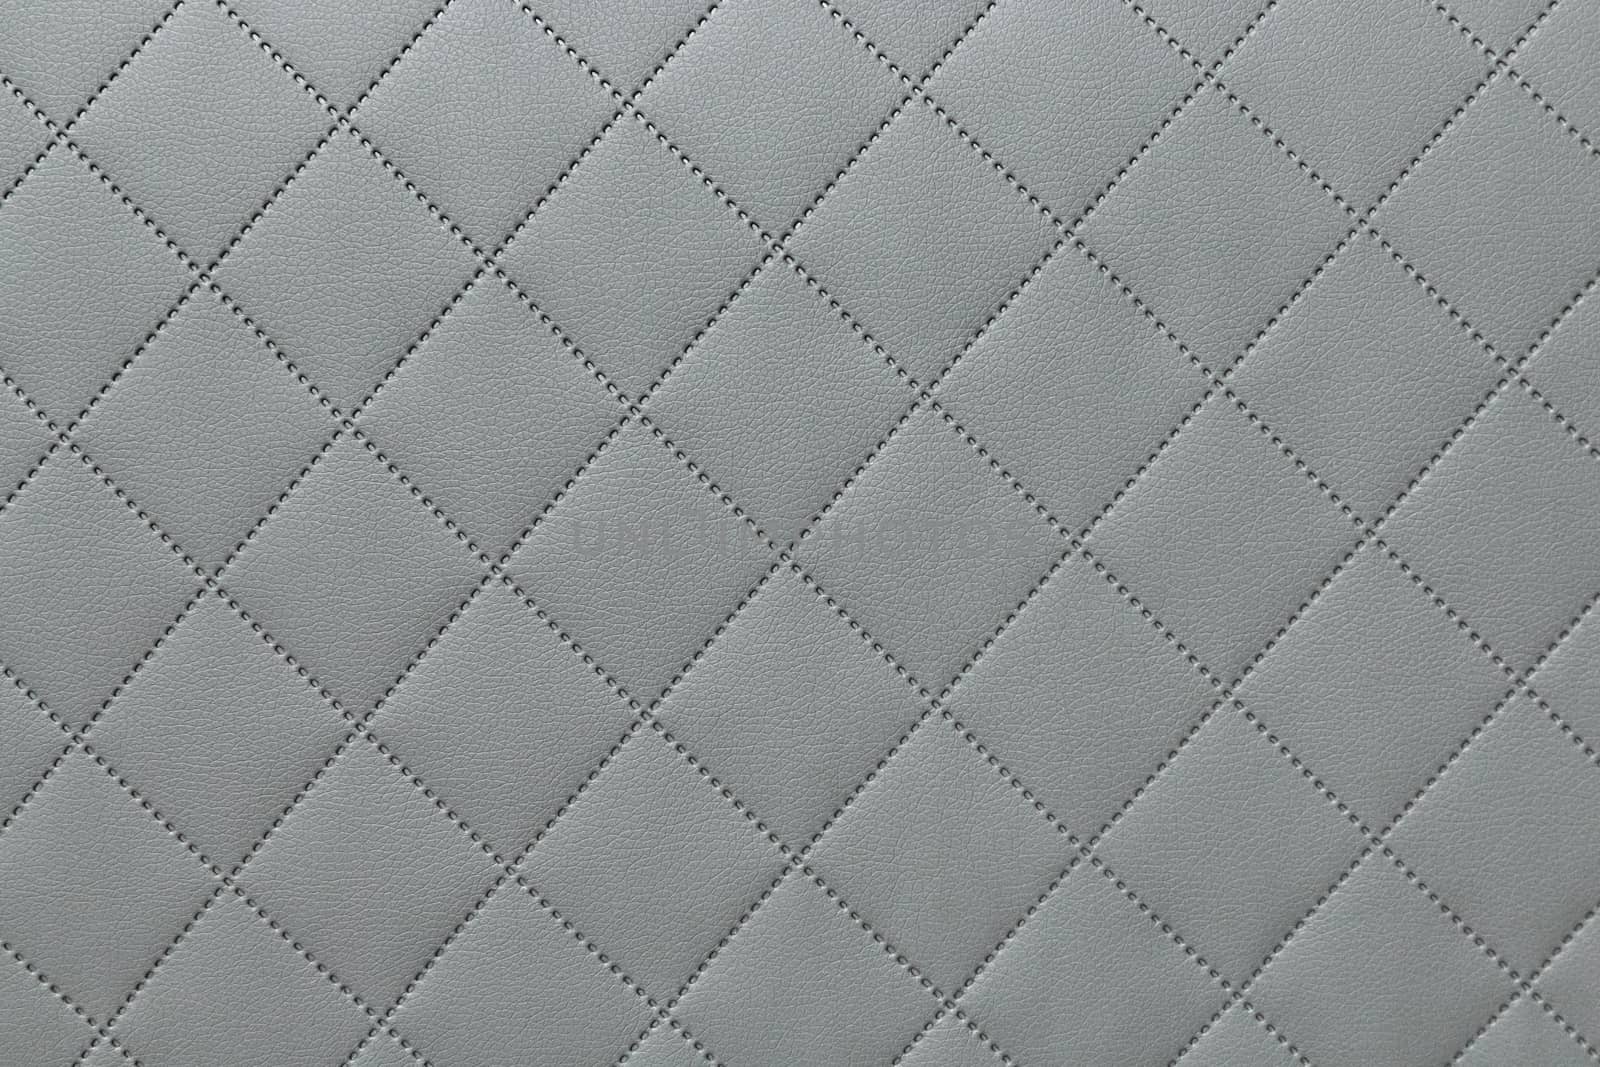 detail of gray sewn leather, gray leather upholstery background pattern by ivo_13